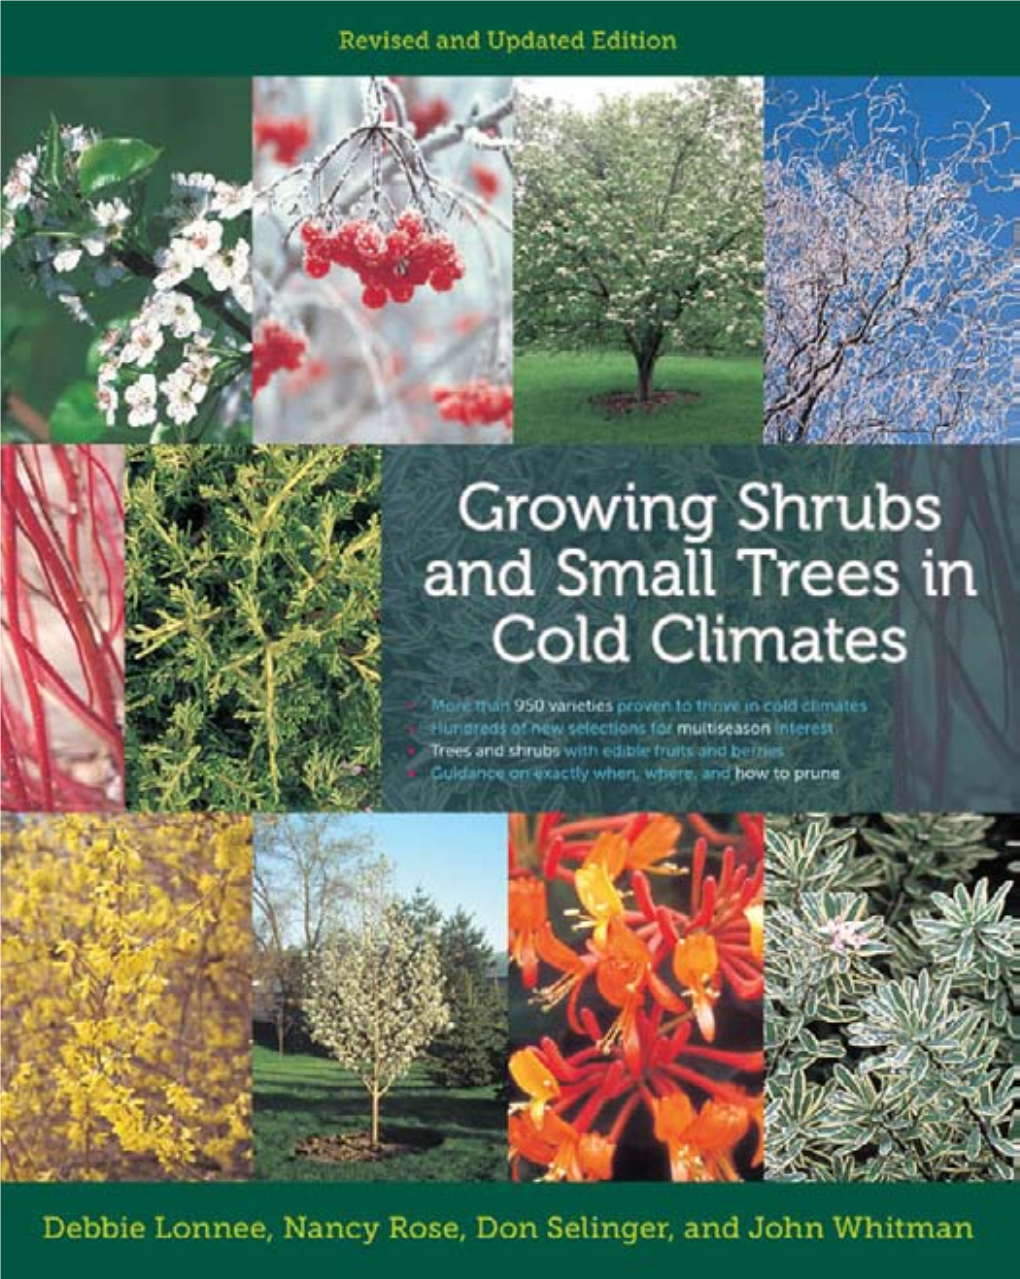 Growing Shrubs and Small Trees in Cold Climates Also Published by the University of Minnesota Press